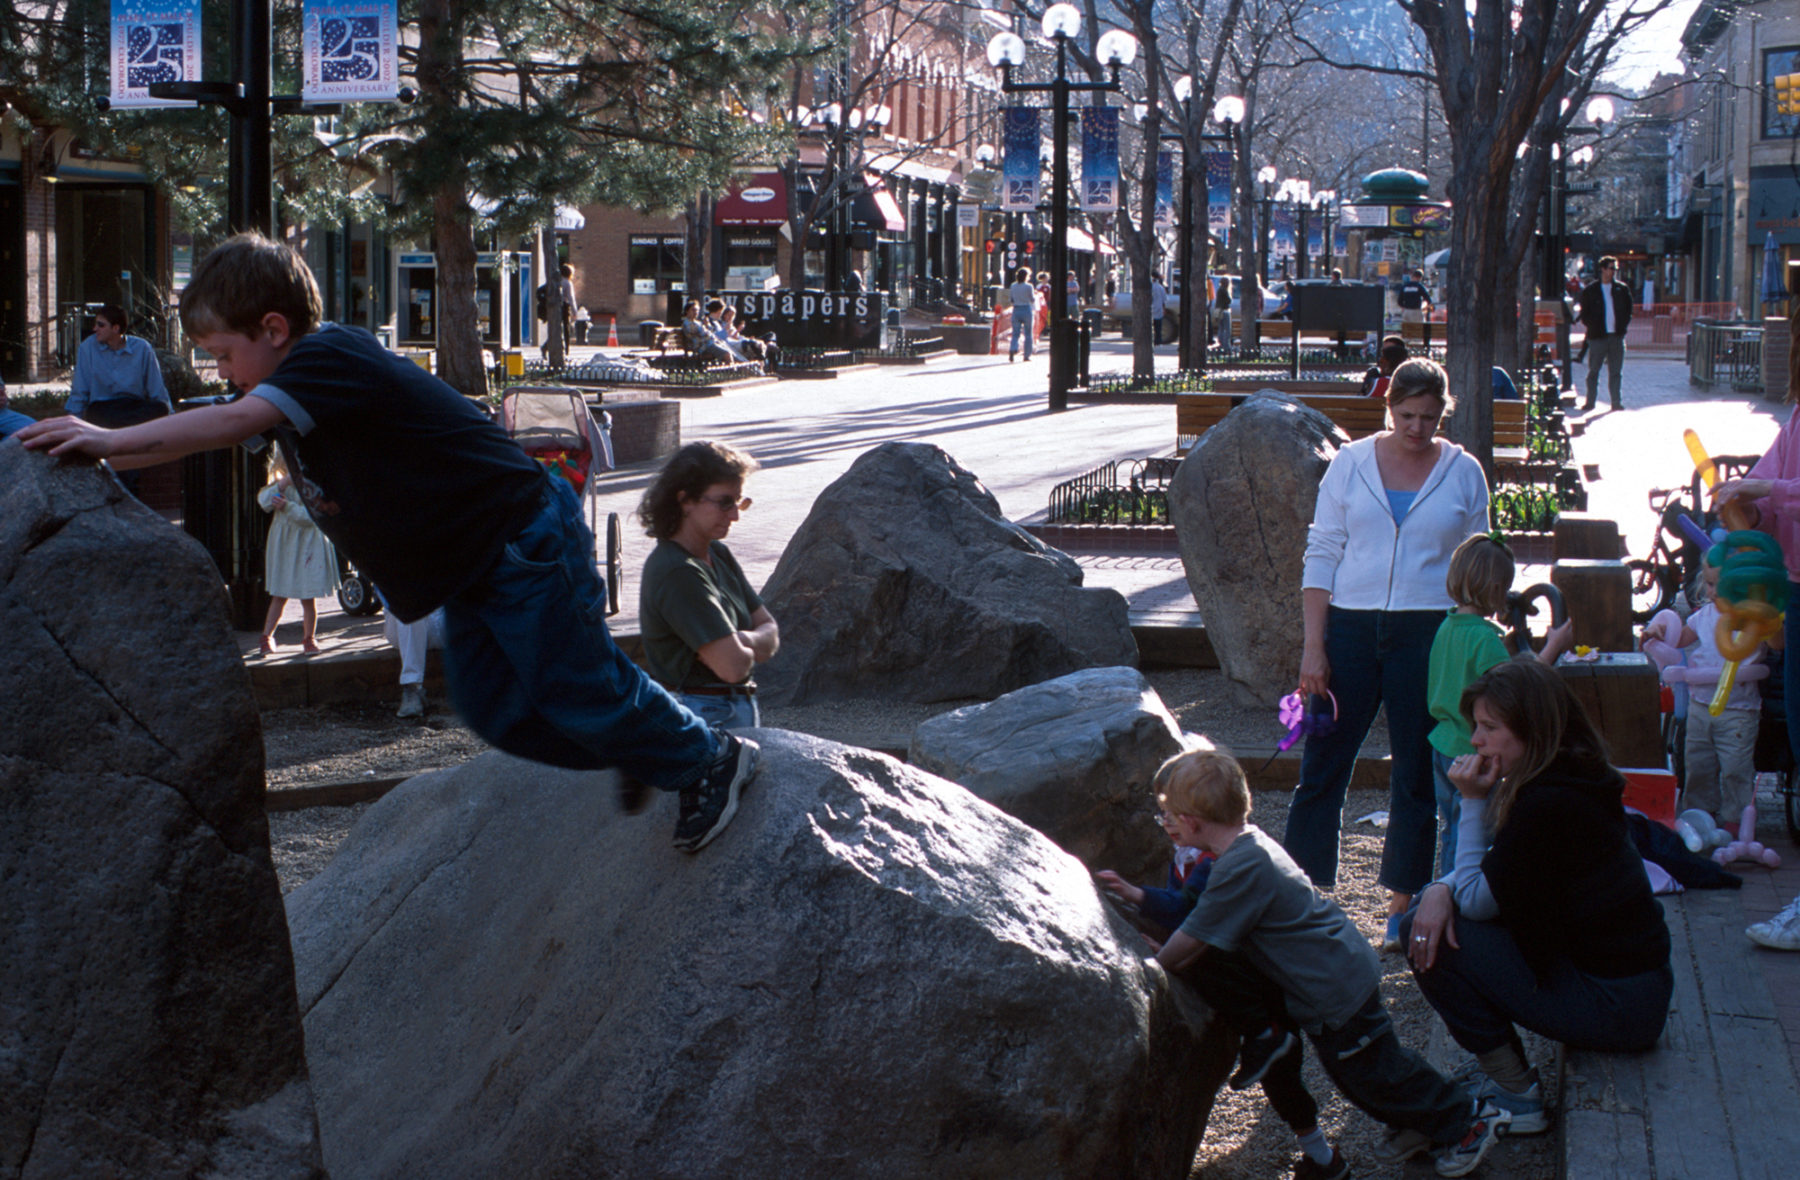 photo of children playing on boulders along the pedestrian mall